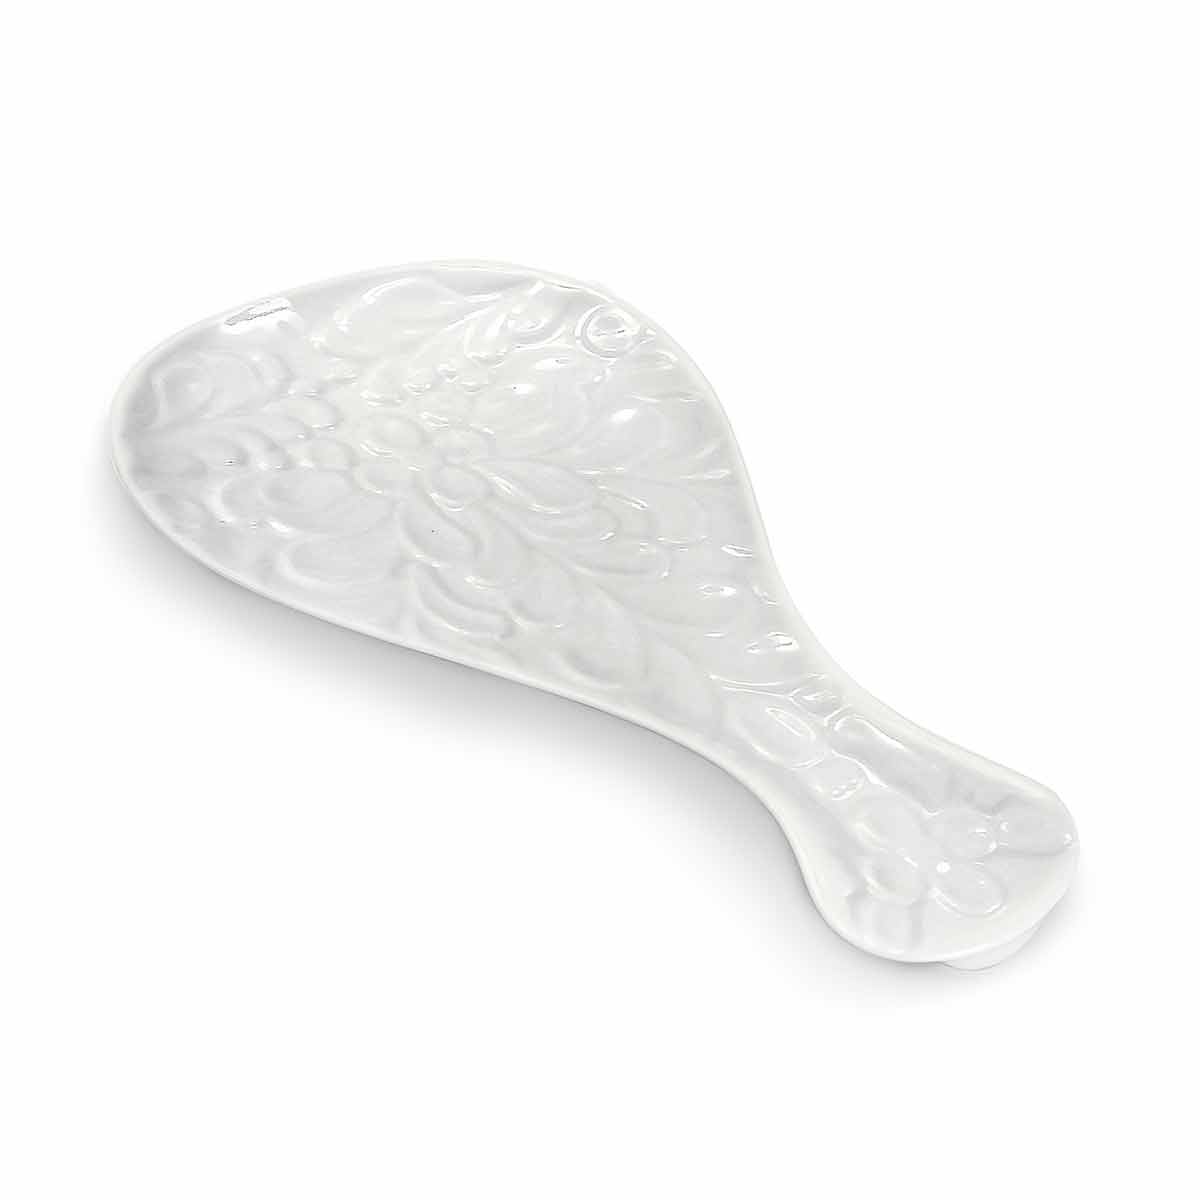 Pantry Textured Ceramic Spoon Rest by Twine